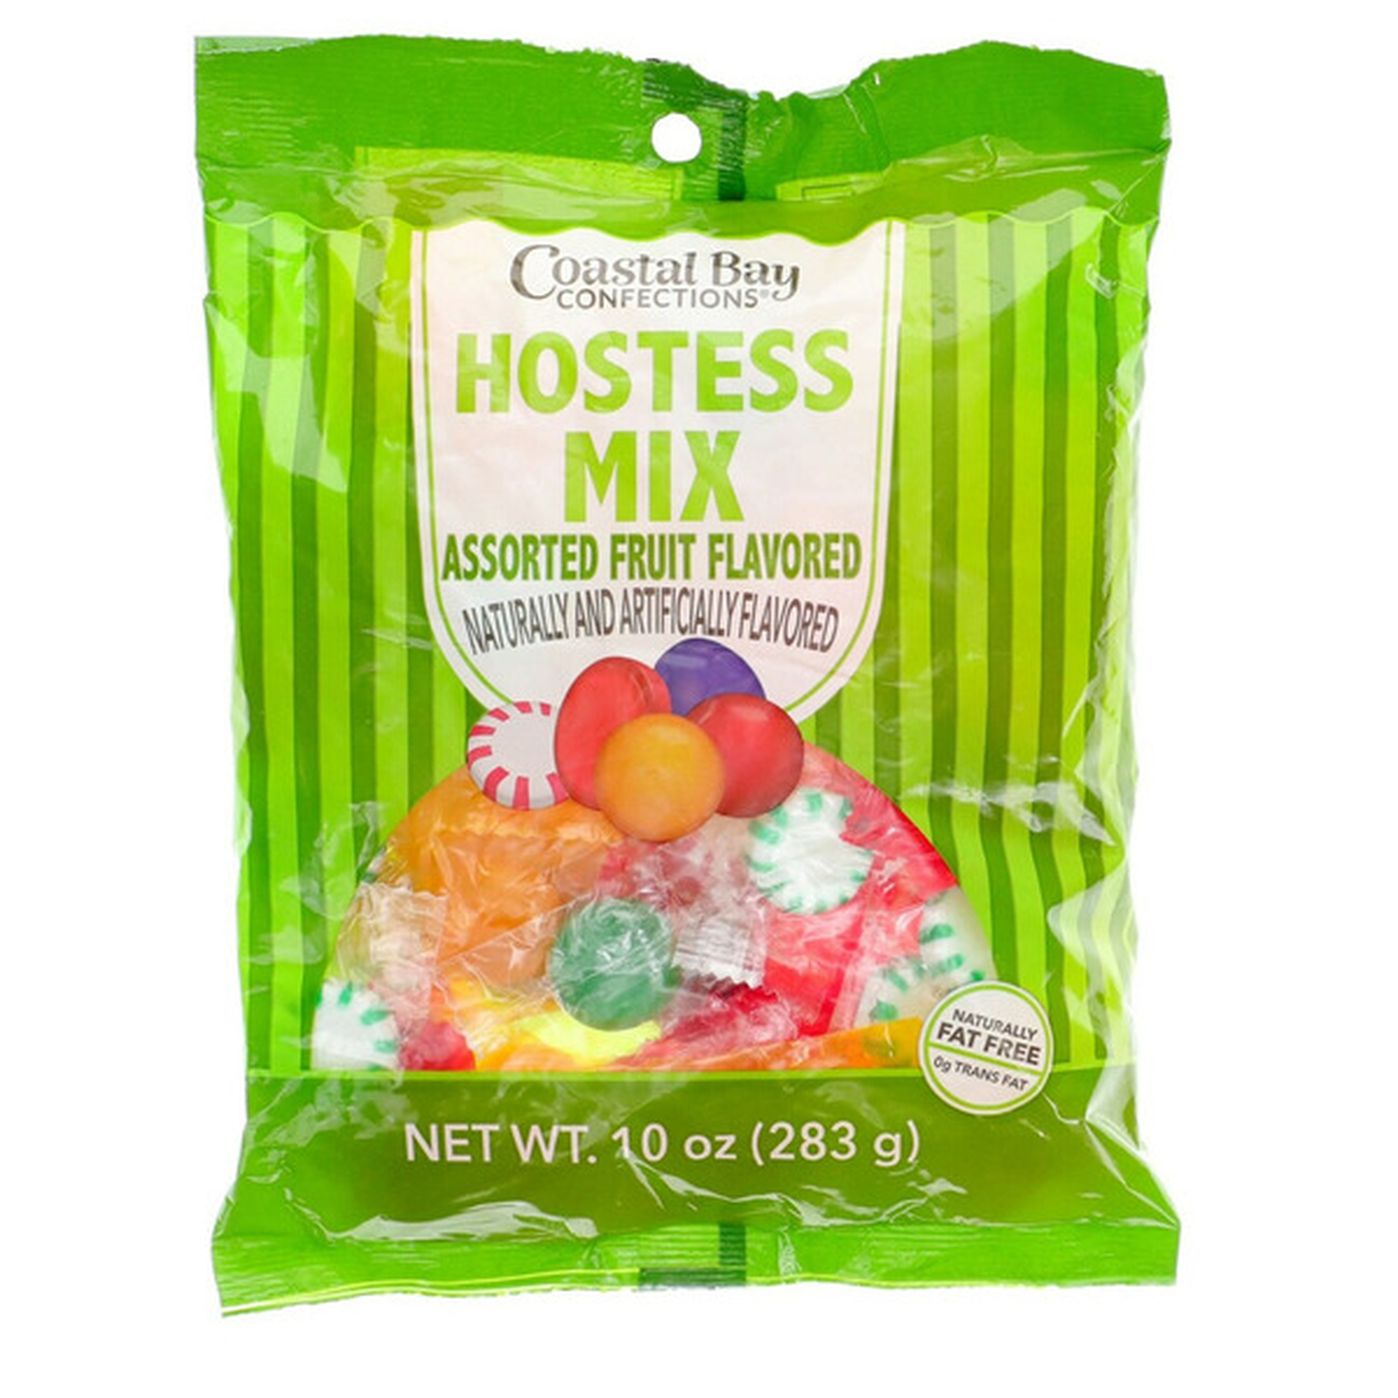 Coastal Bay Confections Hostess Mix Candy (10 oz) Delivery or Pickup ...